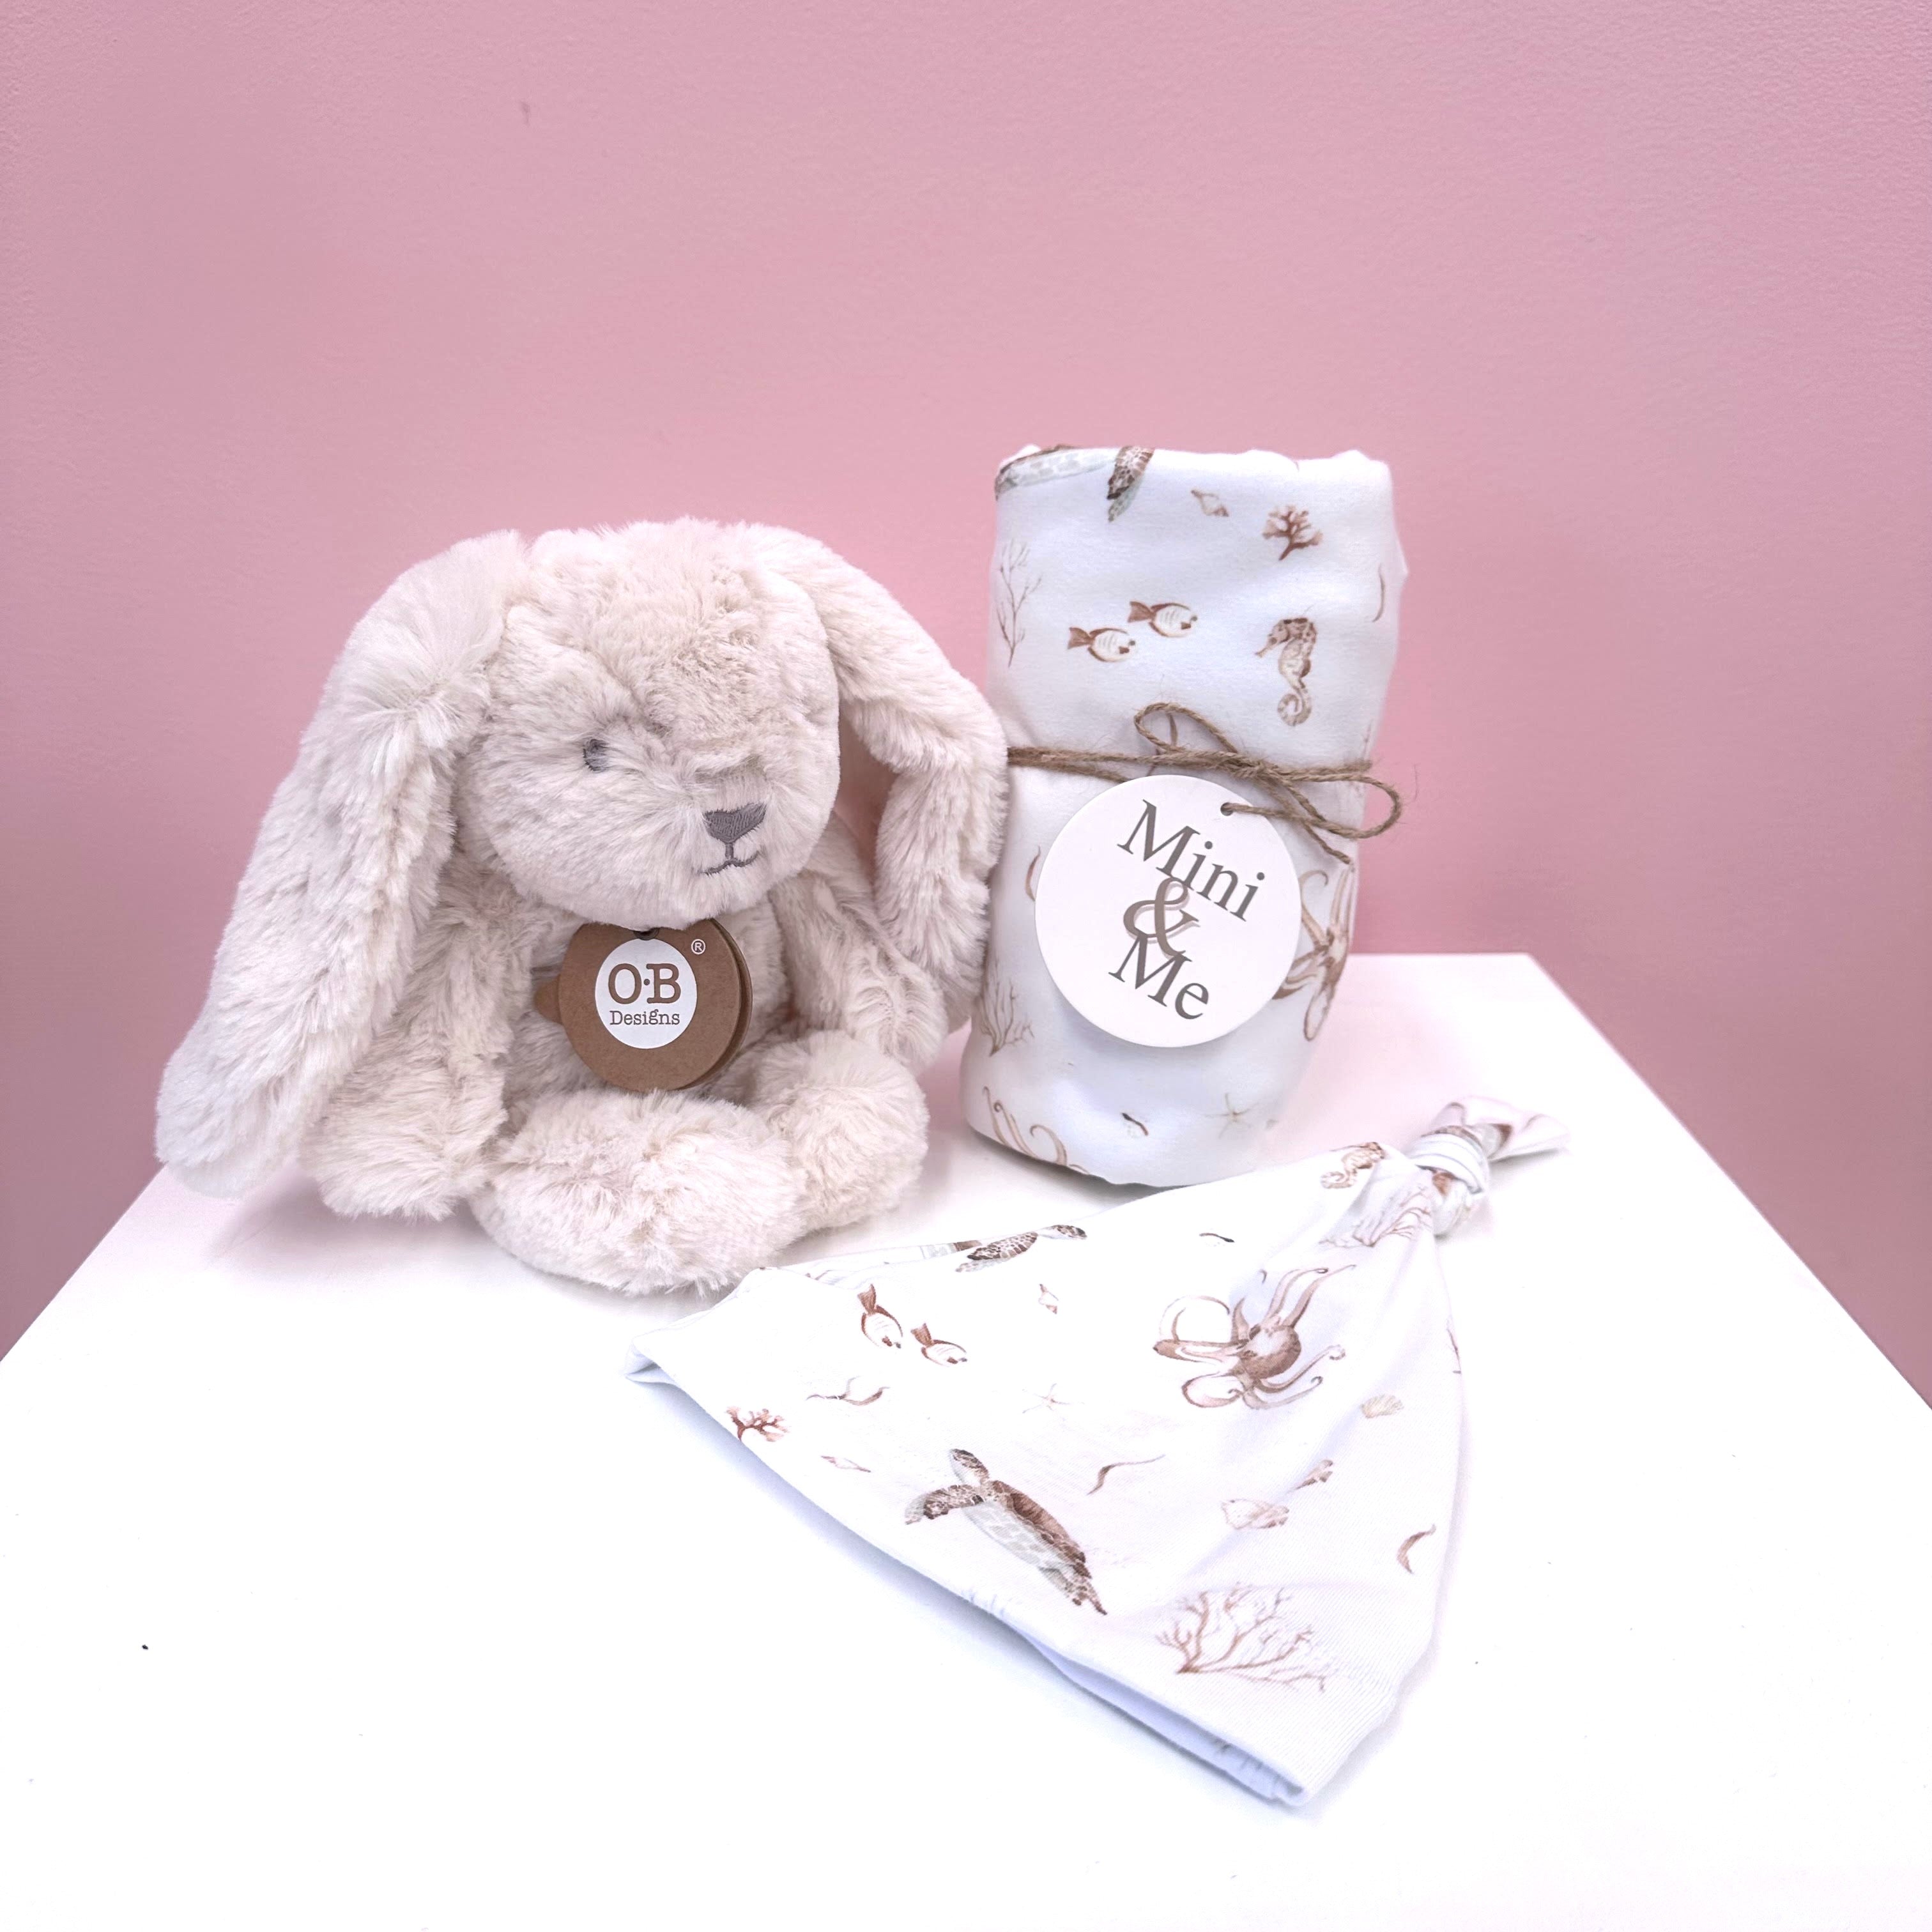 Snuggle Bunny Baby Gift Set with FREE Hat or Head band!